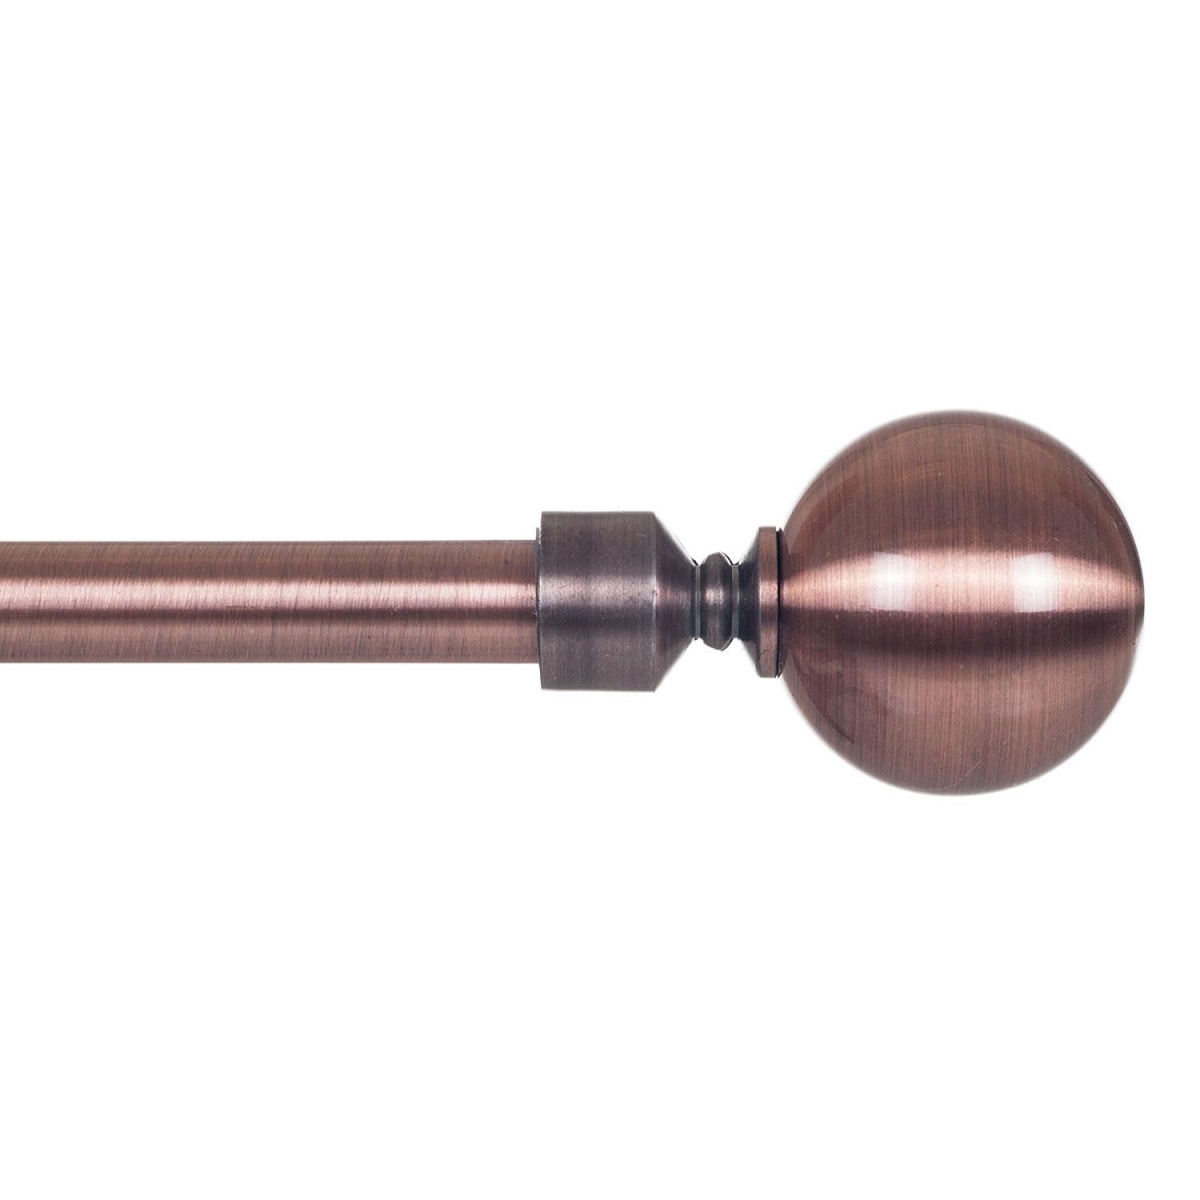 63a-19455 Sphere Curtain Rod For Window, Antique Copper - 0.75 In.